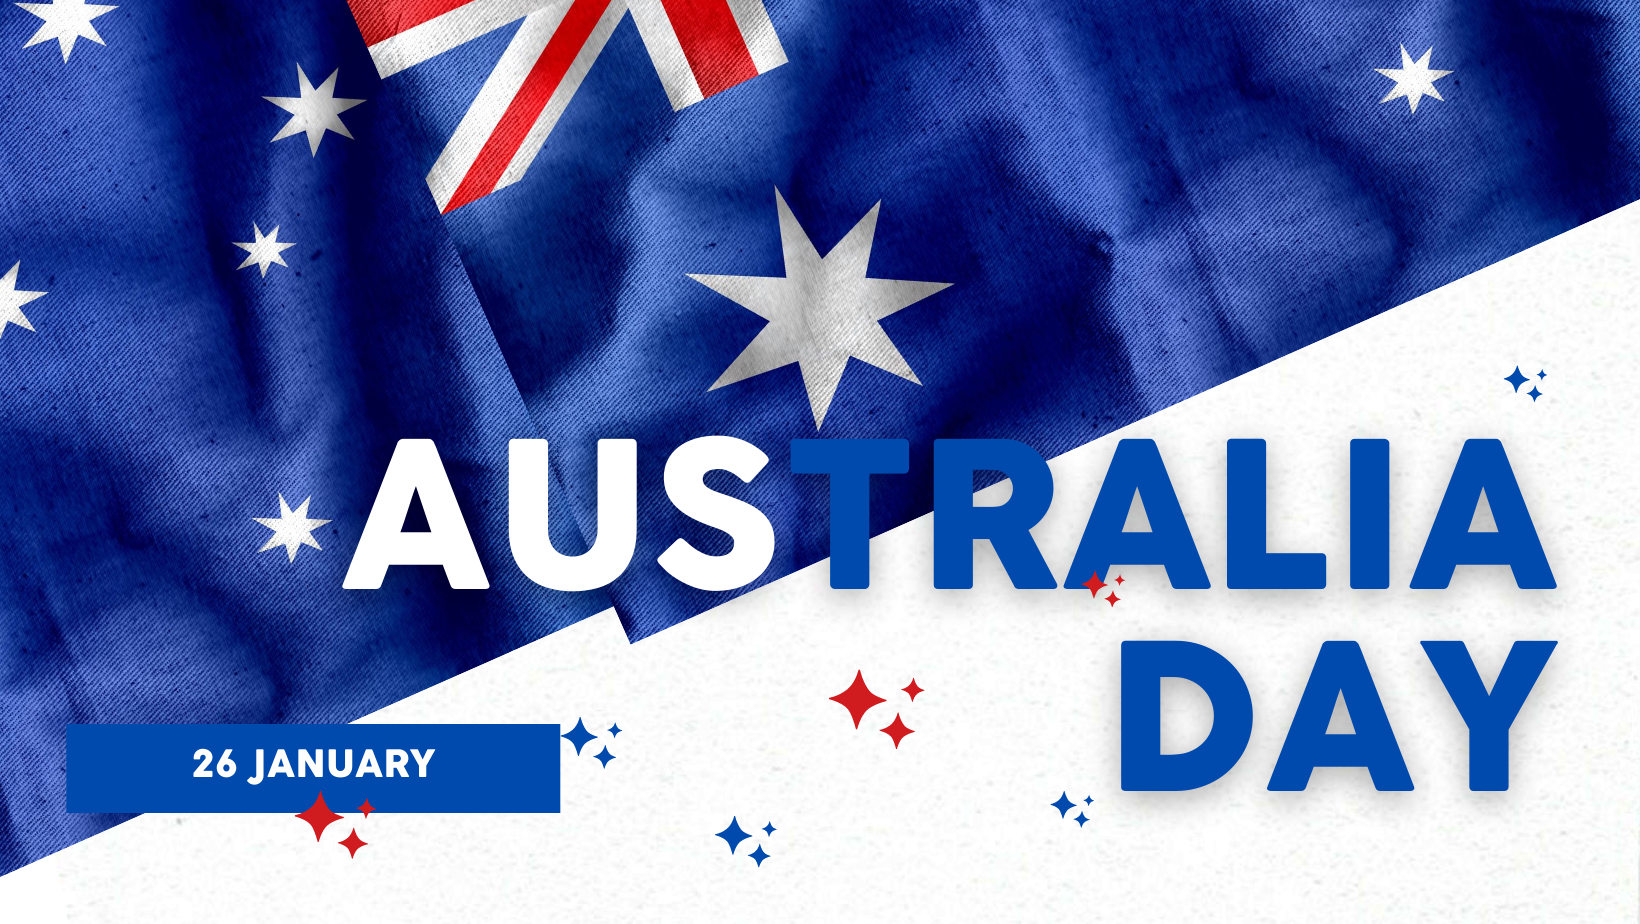 Come celebrate Australia Day with us at the Ronnie in Meribel on Jan 26, 2022